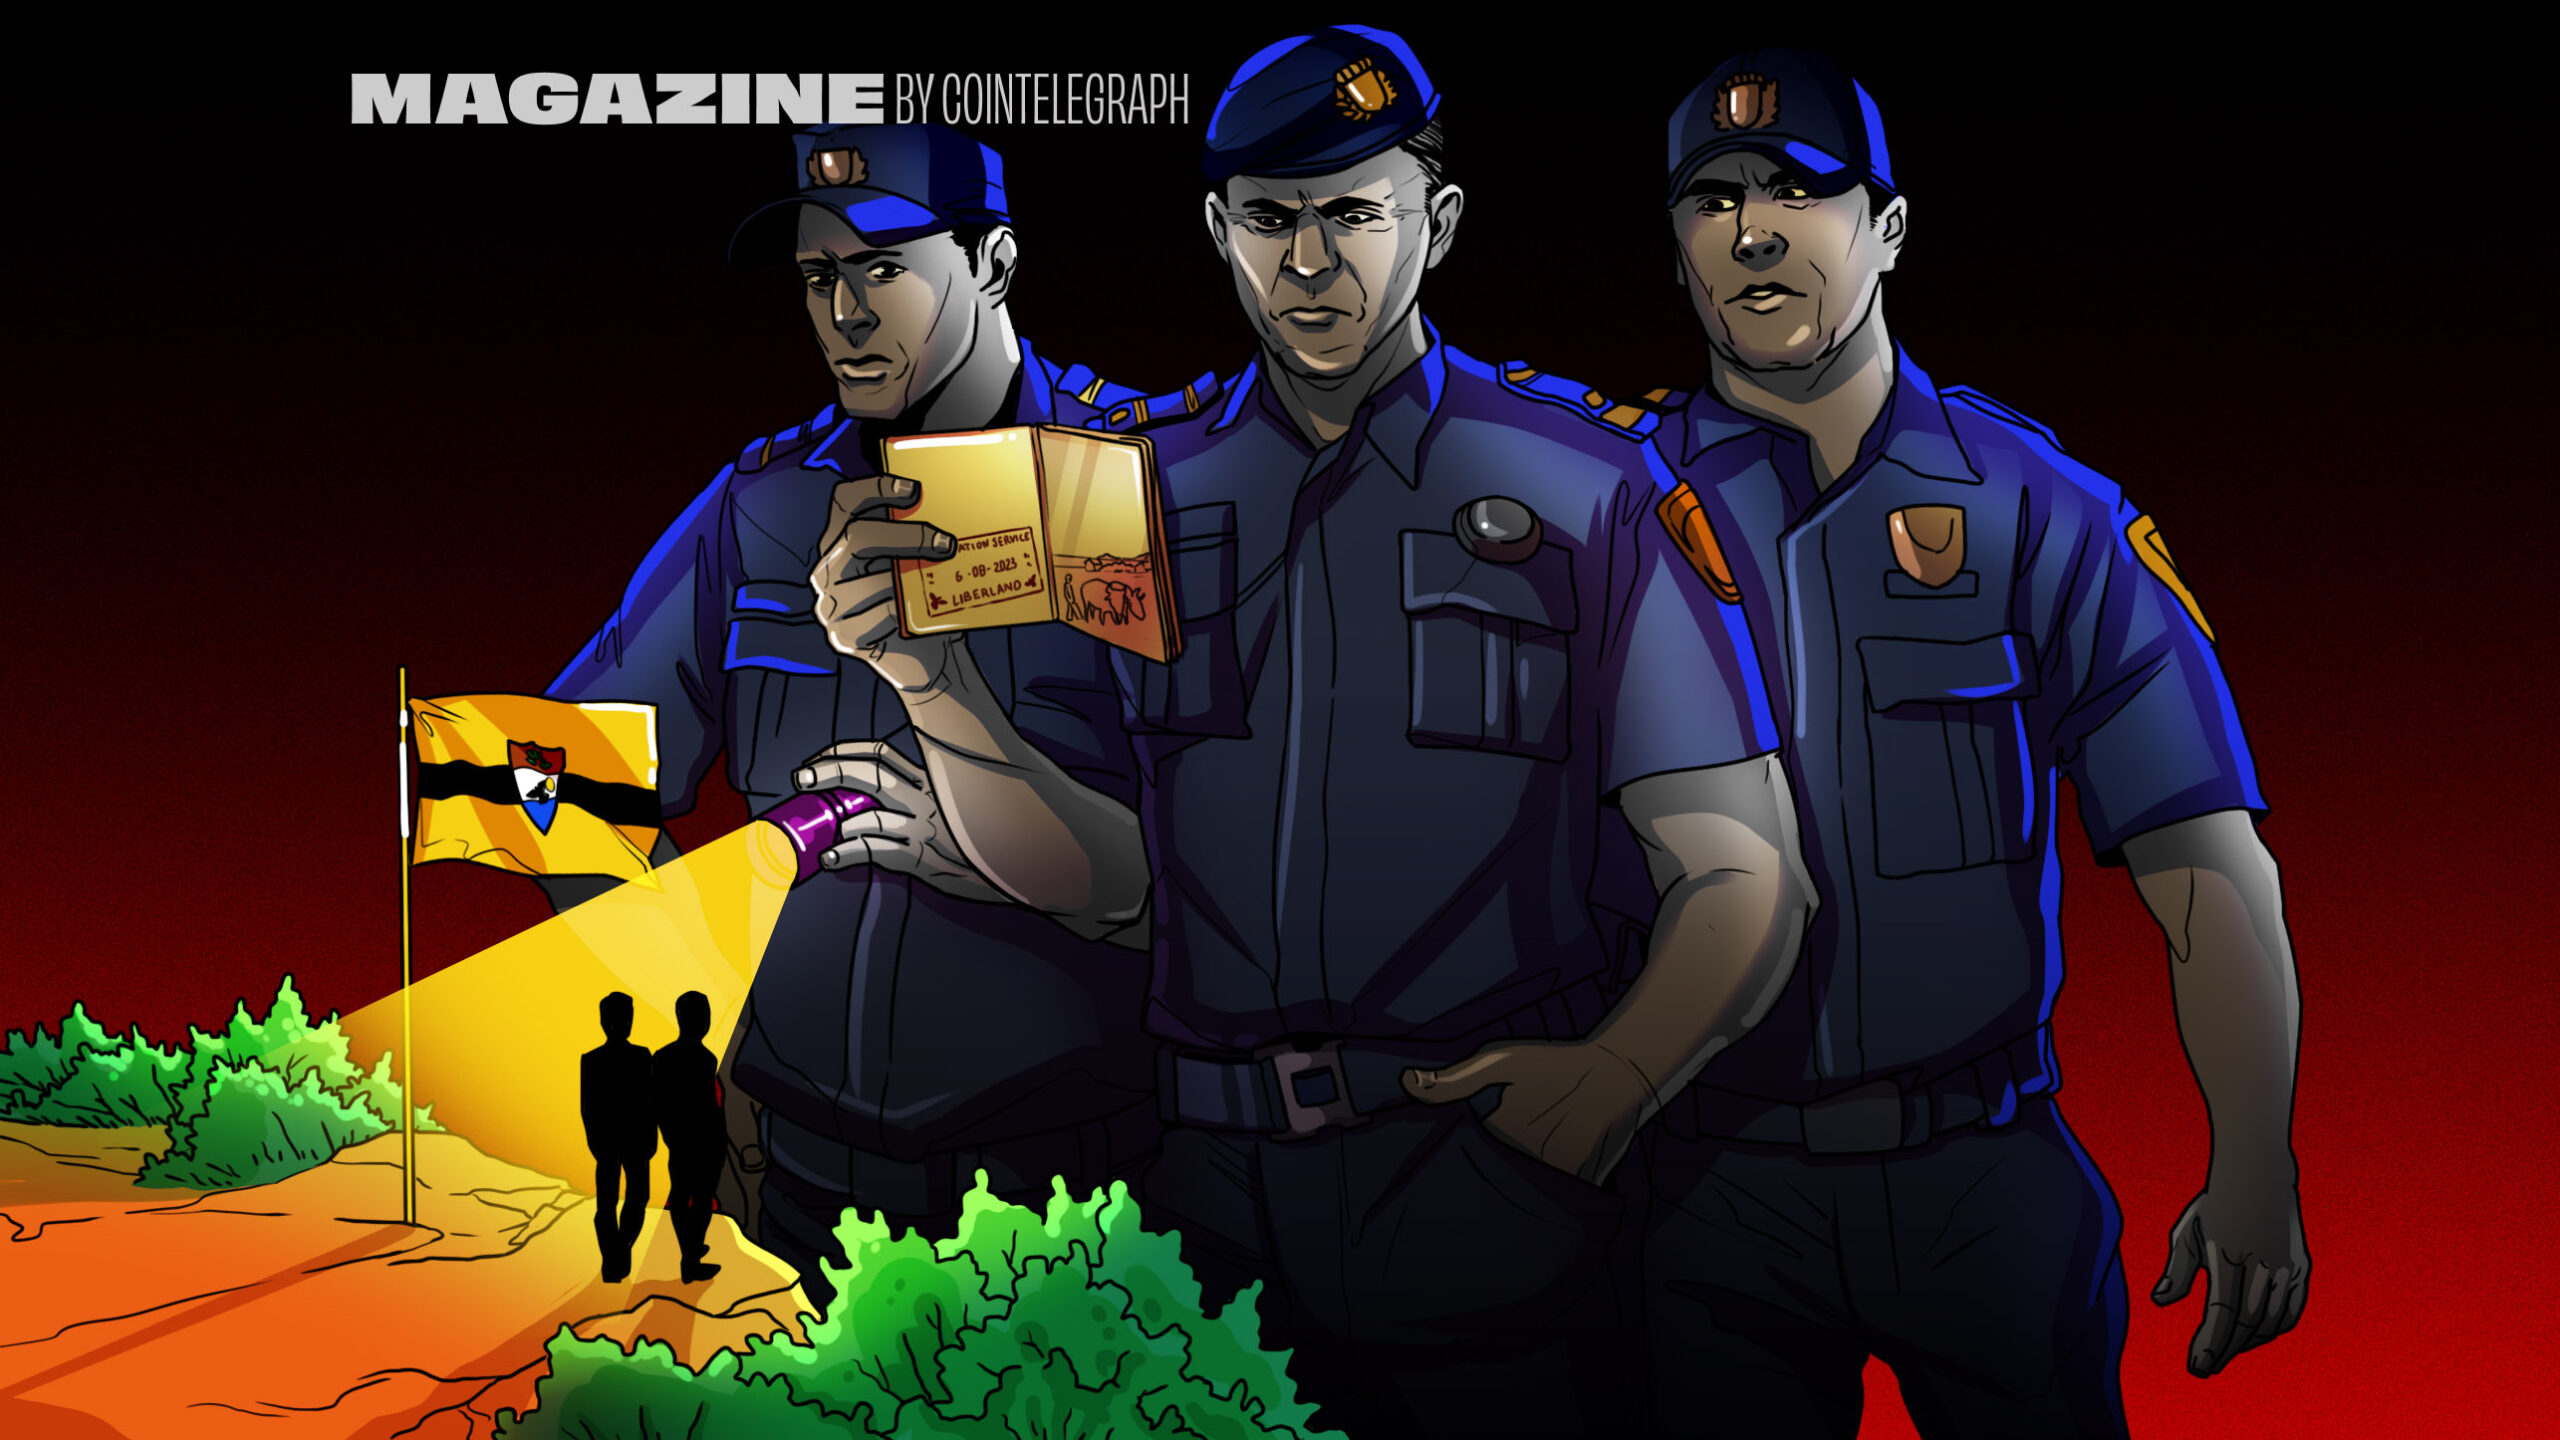 Dodging guards with inner-tubes, decoys and diplomats – Cointelegraph Magazine